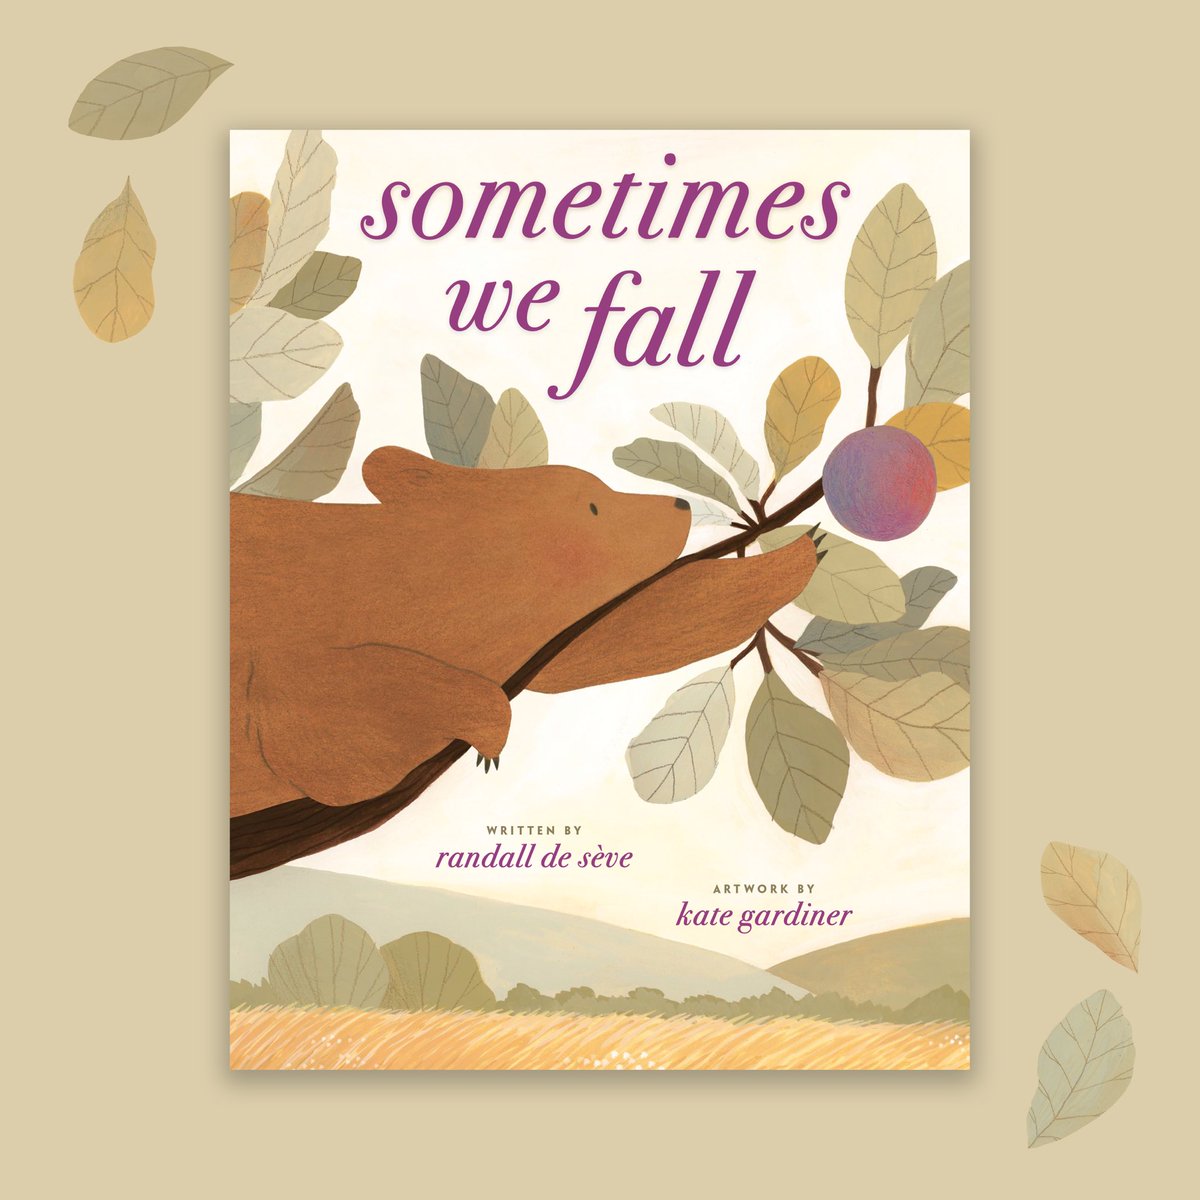 Cover reveal for “Sometimes We Fall”written by the amazing Randall de Sève ✨available for preorder now, link in my bio ✨Thank you so much to my wonderful editor Lee Wade, art director Rachael Cole, designer Paula Baver, the whole Random House Studio team, and Steven Malk 💛